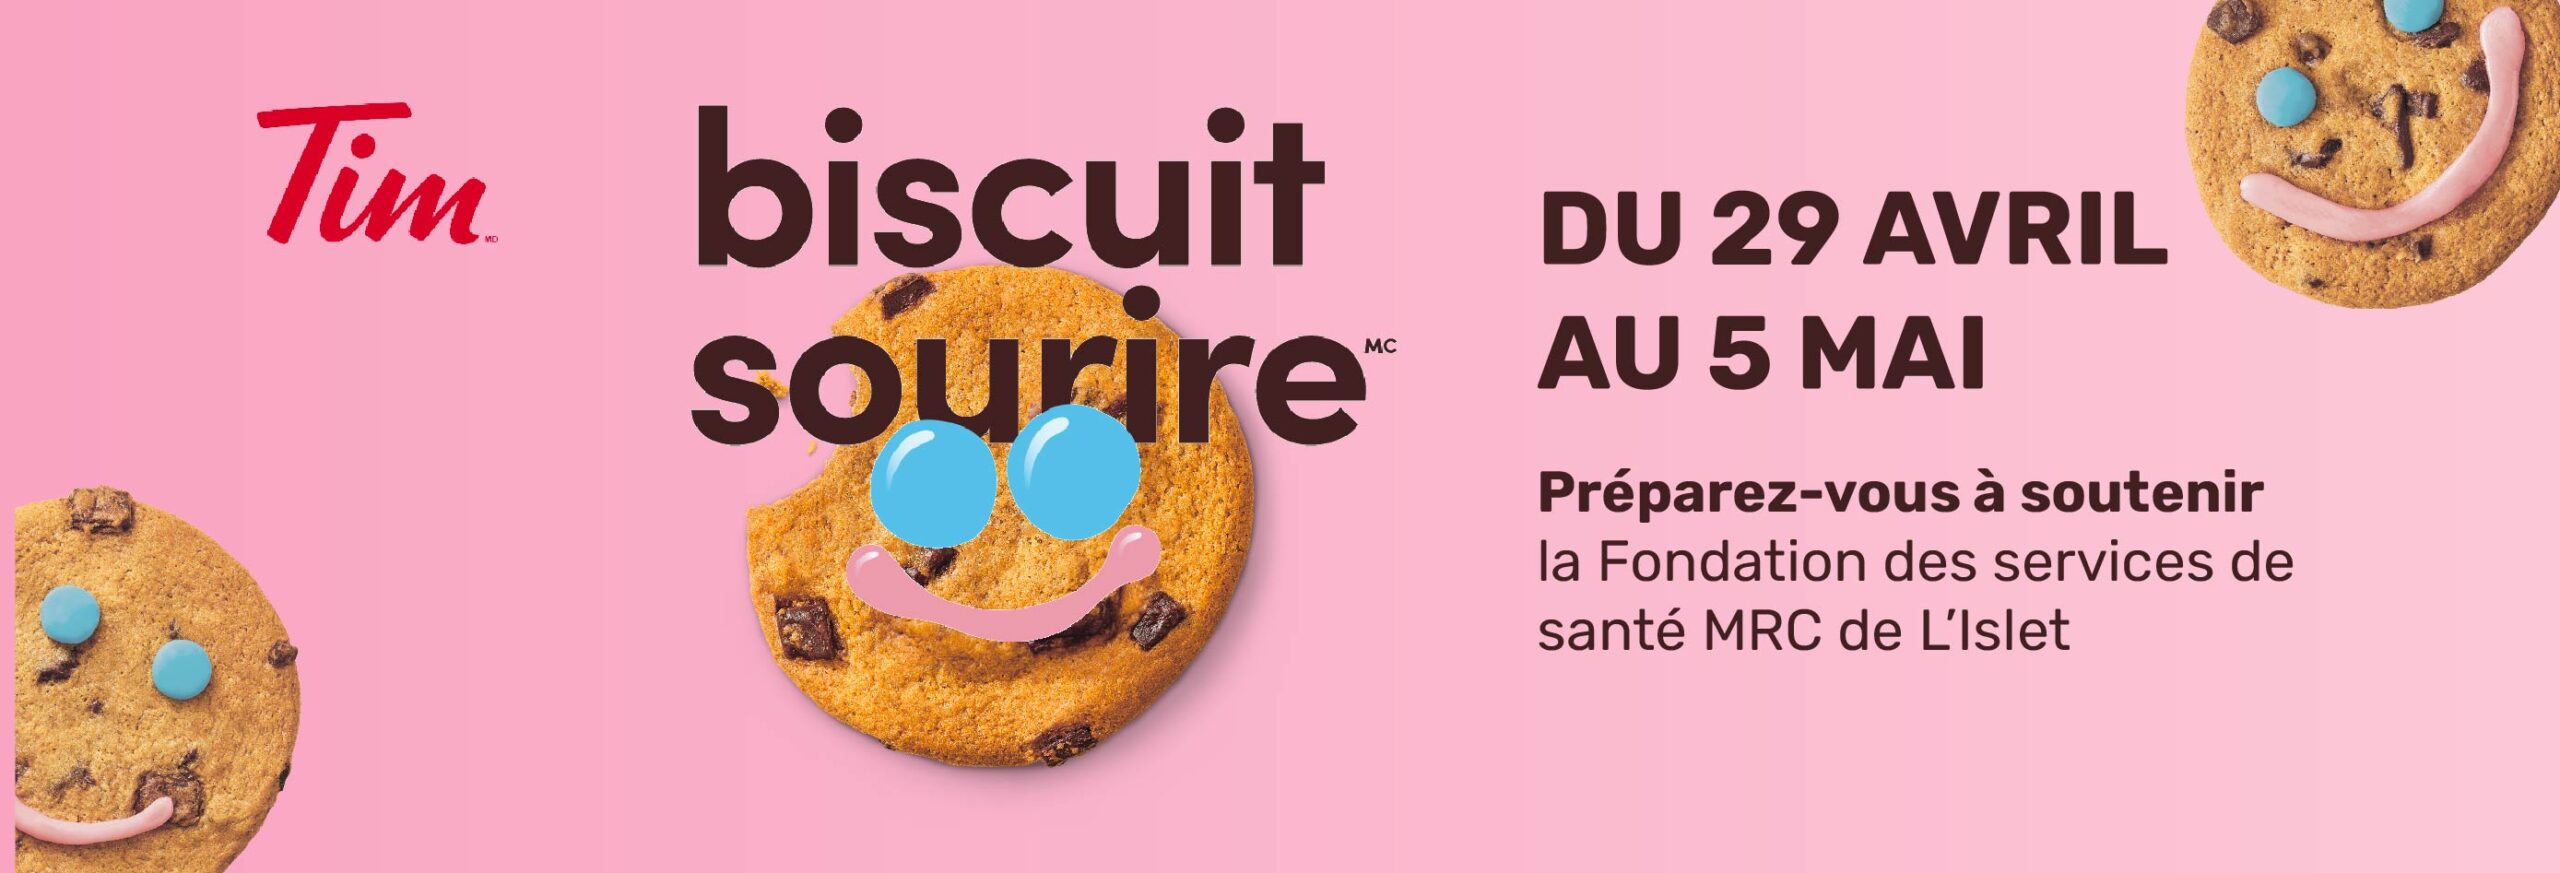 Campagne Biscuit sourire